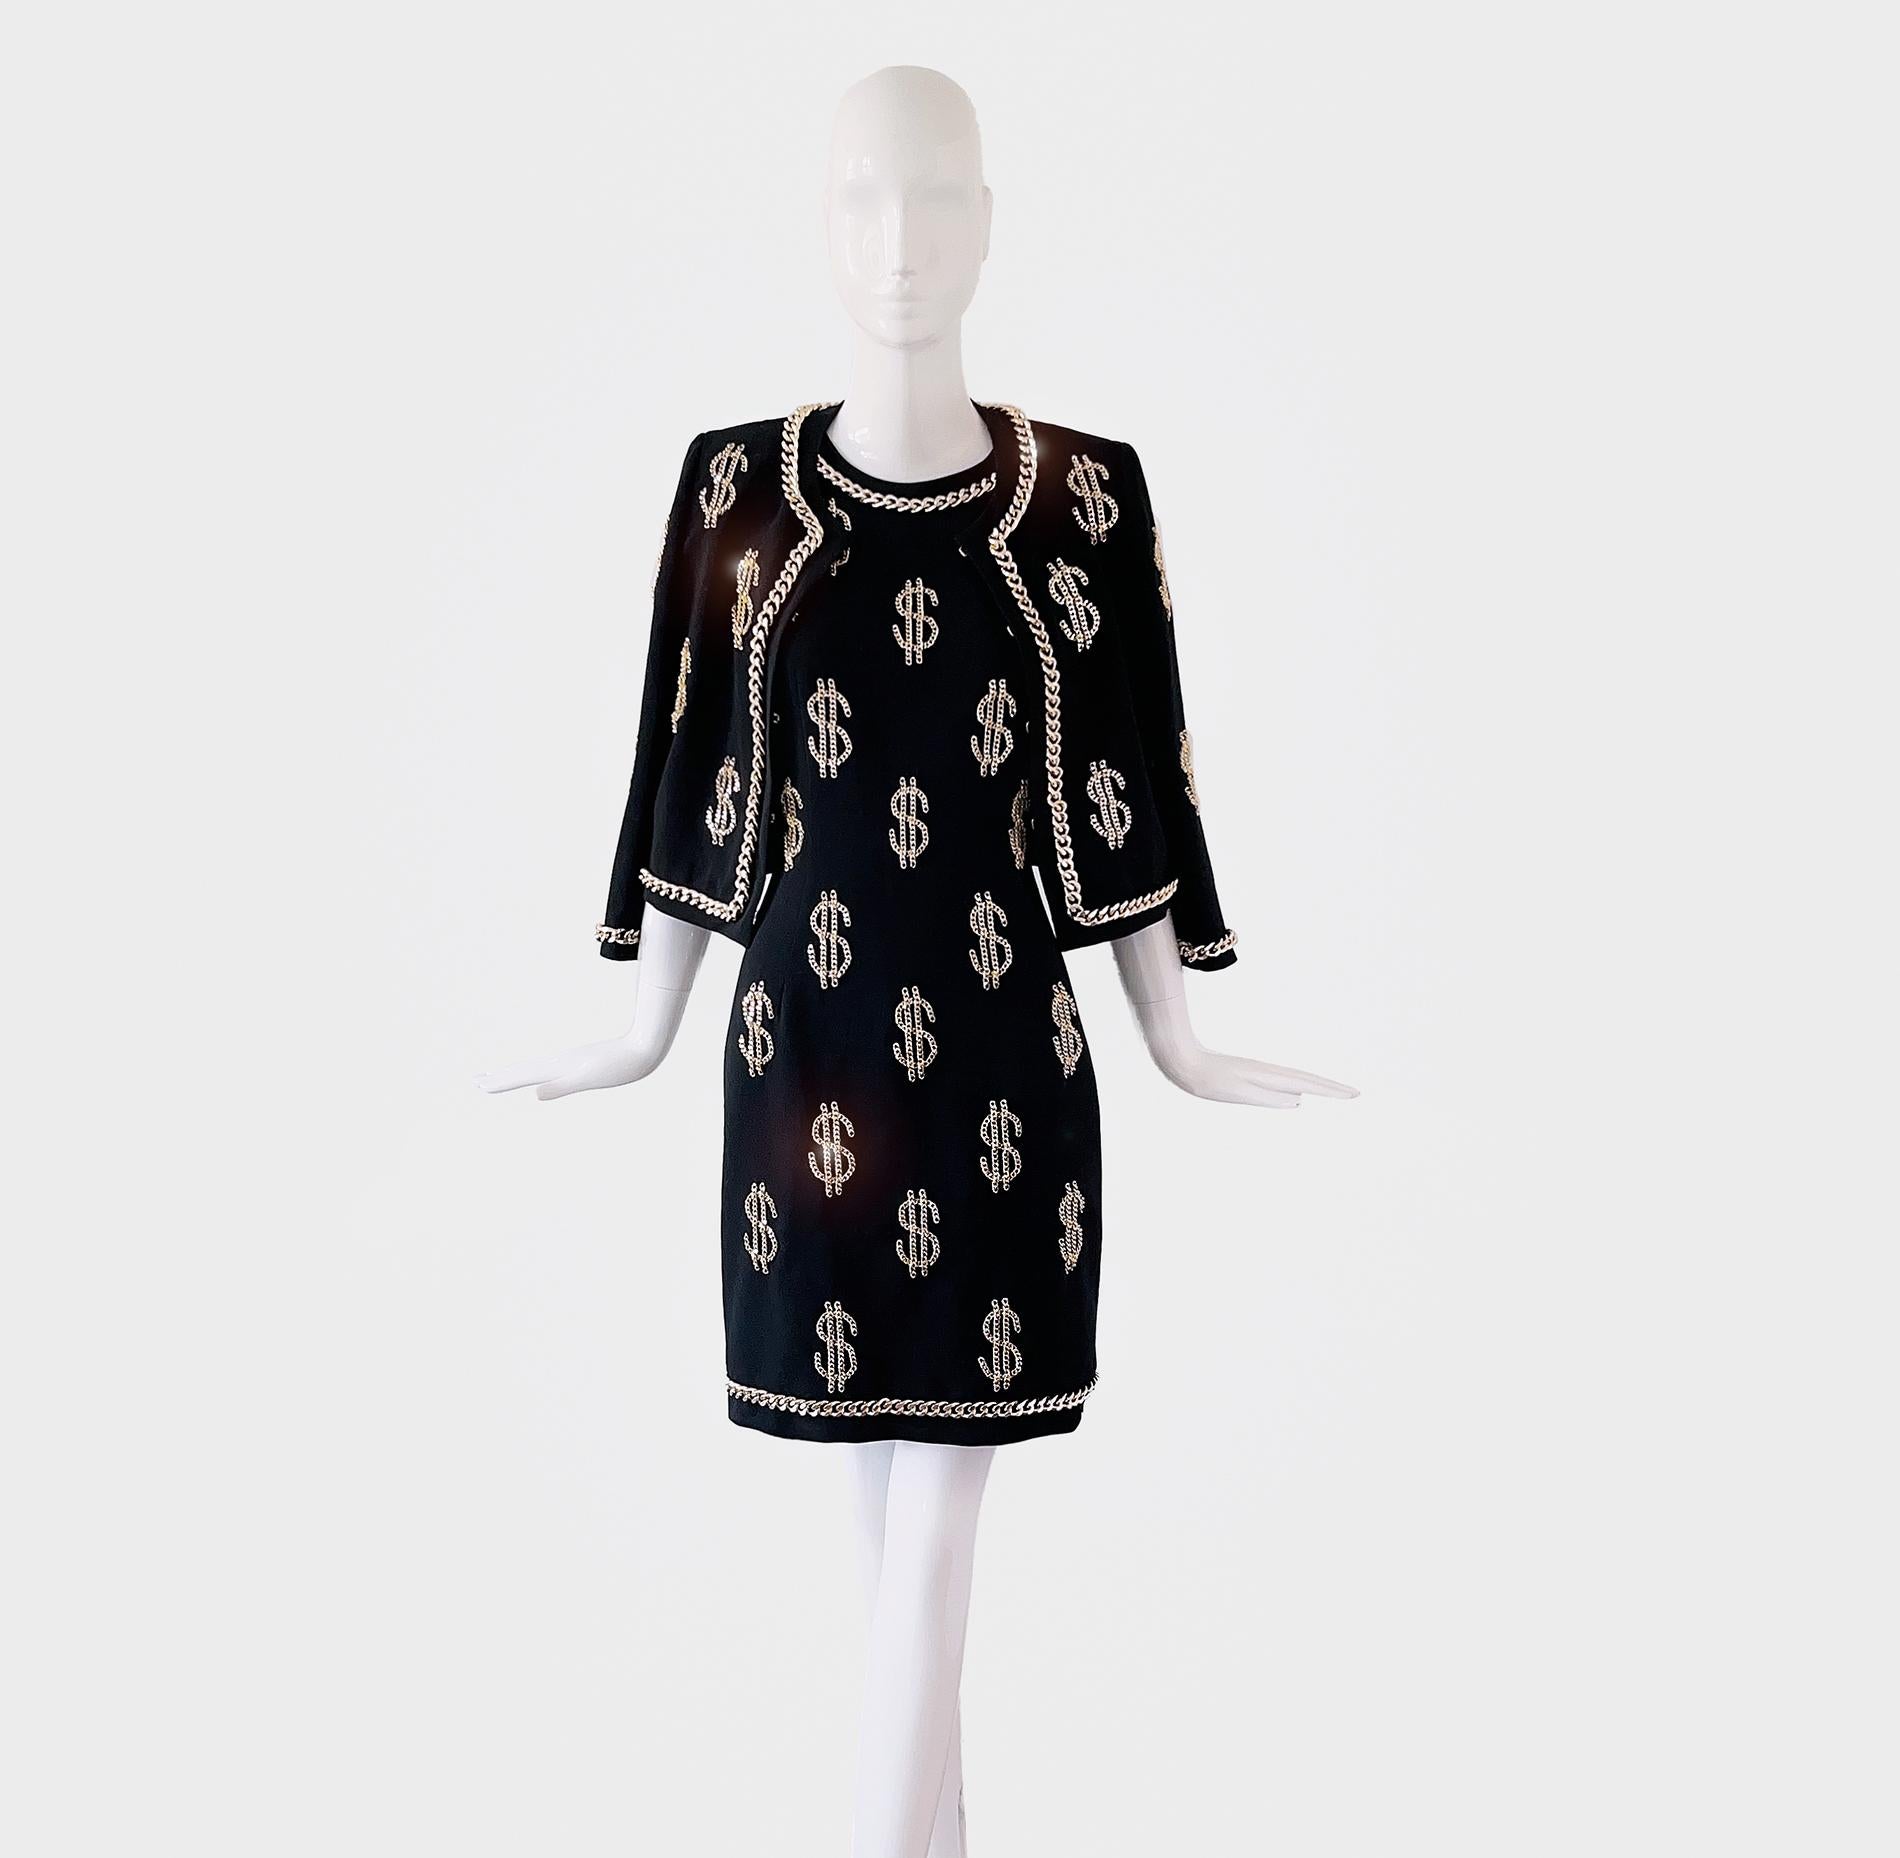 Iconique MOSCHINO Couture Dollar Sign Ensembe Black Dress Jacket Gold Chain Set  en vente 6